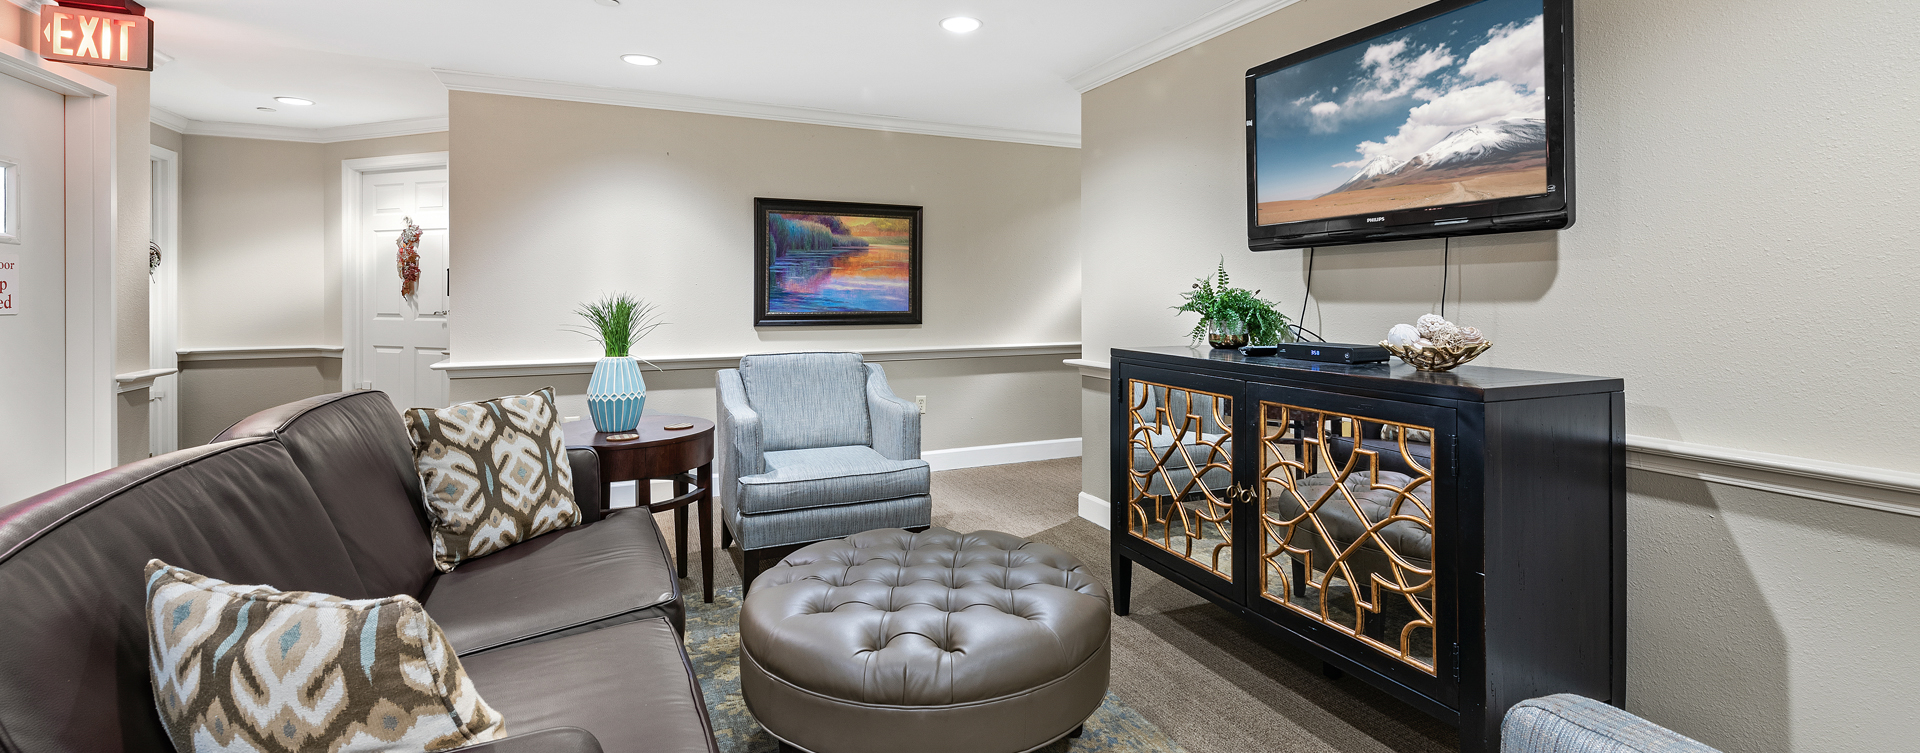 Residents can enjoy furniture covered in cozy fabrics in the Mary B’s living room at Bickford of Bexley